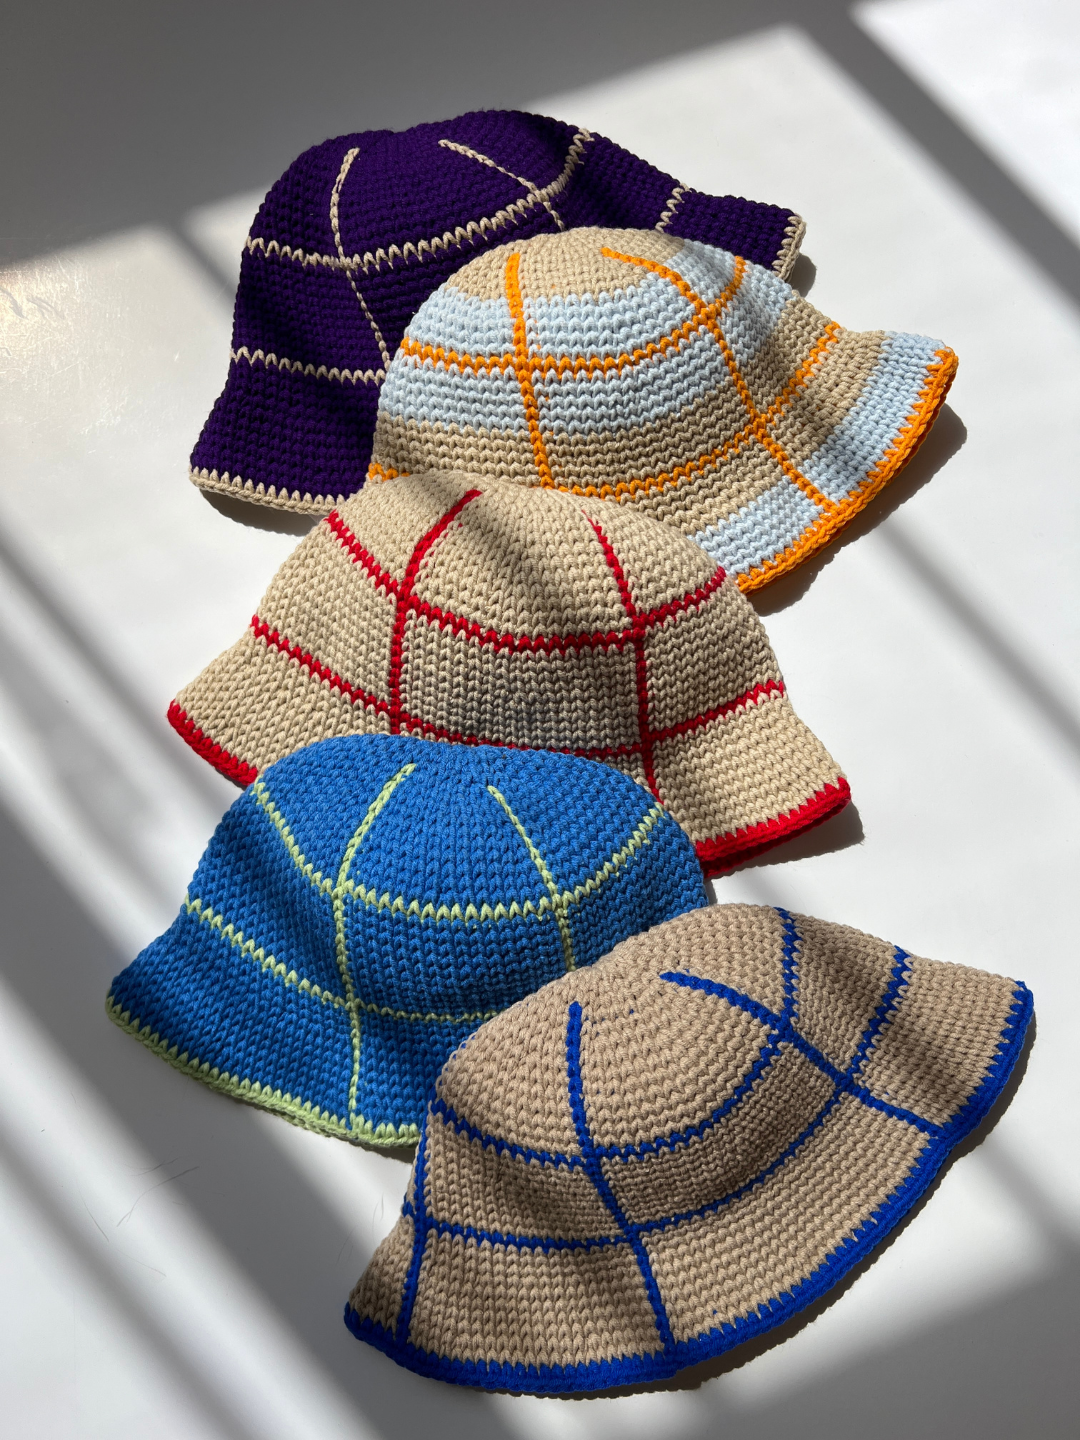 Five HAND-CROCHETED GRID HATS - 3-6Y are arranged in two rows under the sunlight, casting shadows. Made from cotton yarn, the hats come in various colors and patterns, including purple with white, yellow with blue and orange, tan with red, blue with green, and tan with blue.